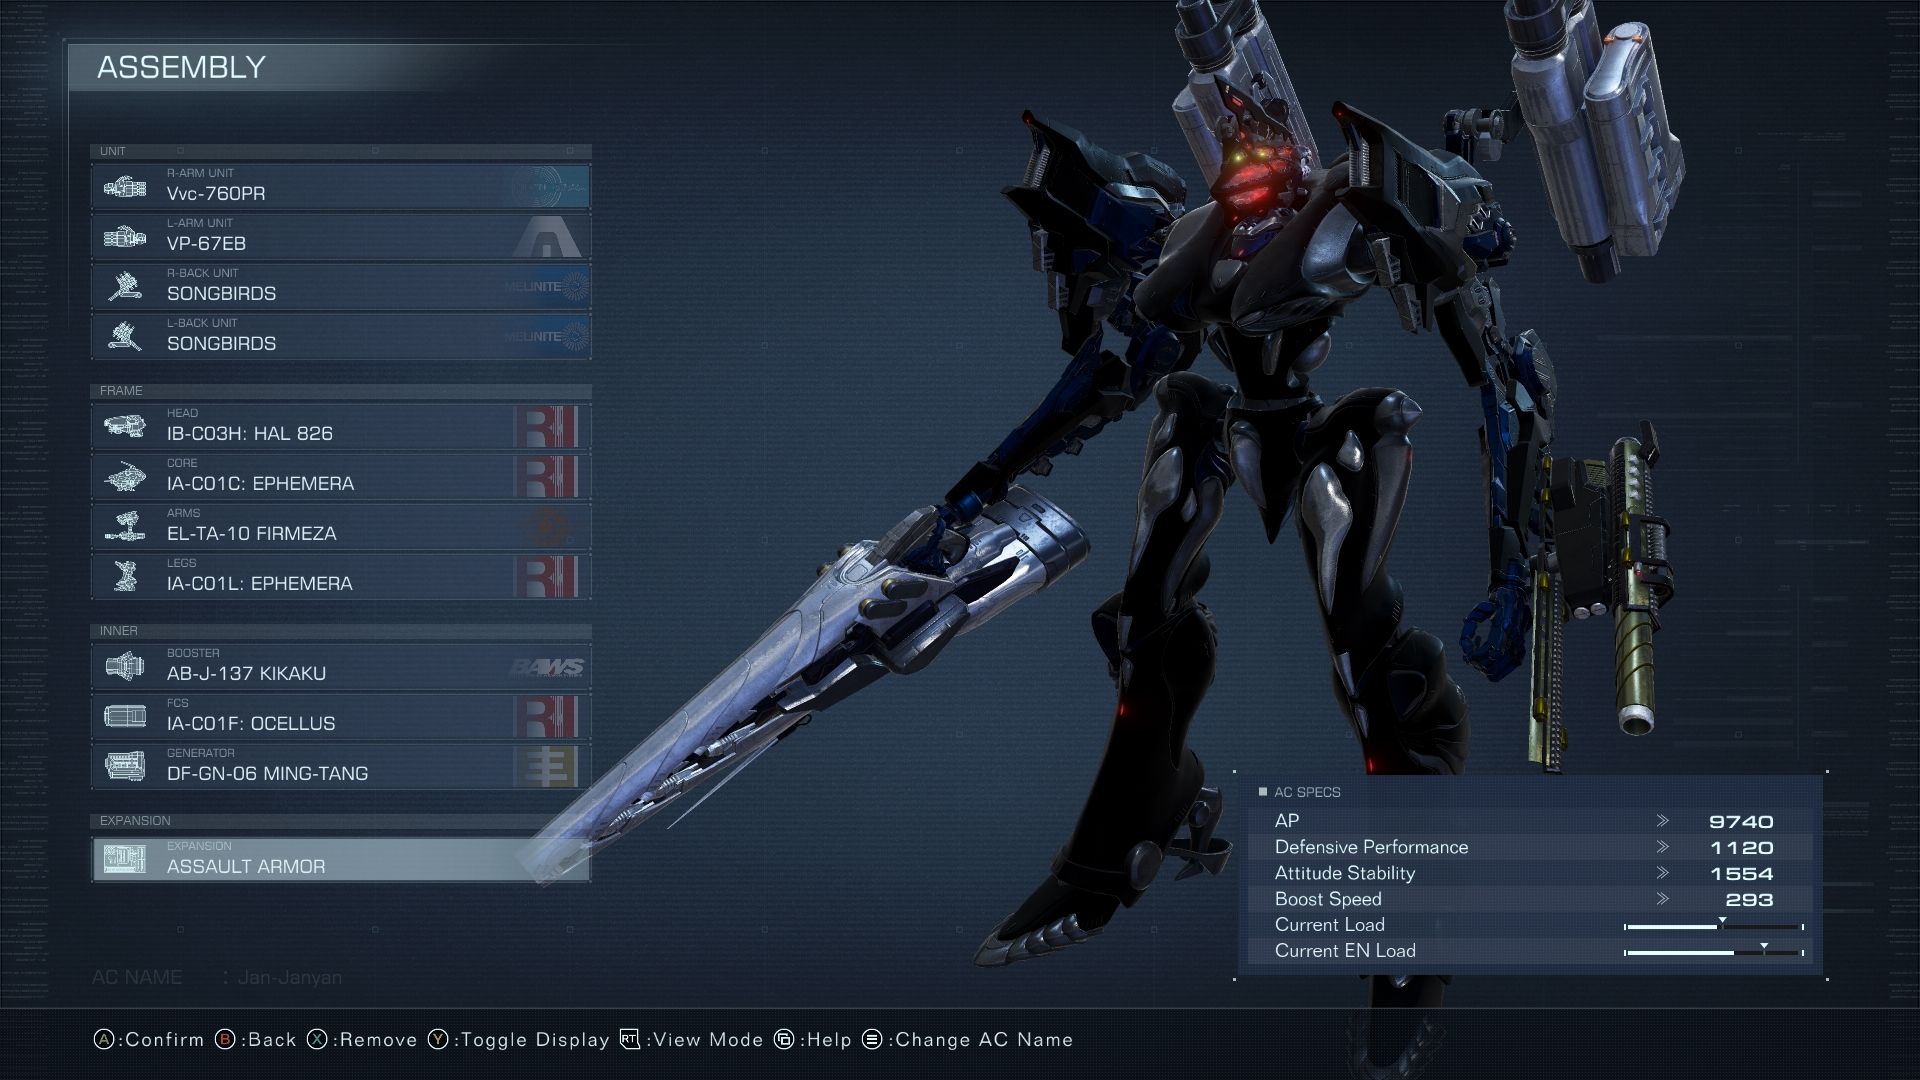 The recommended setup for the mission in Armored Core 6